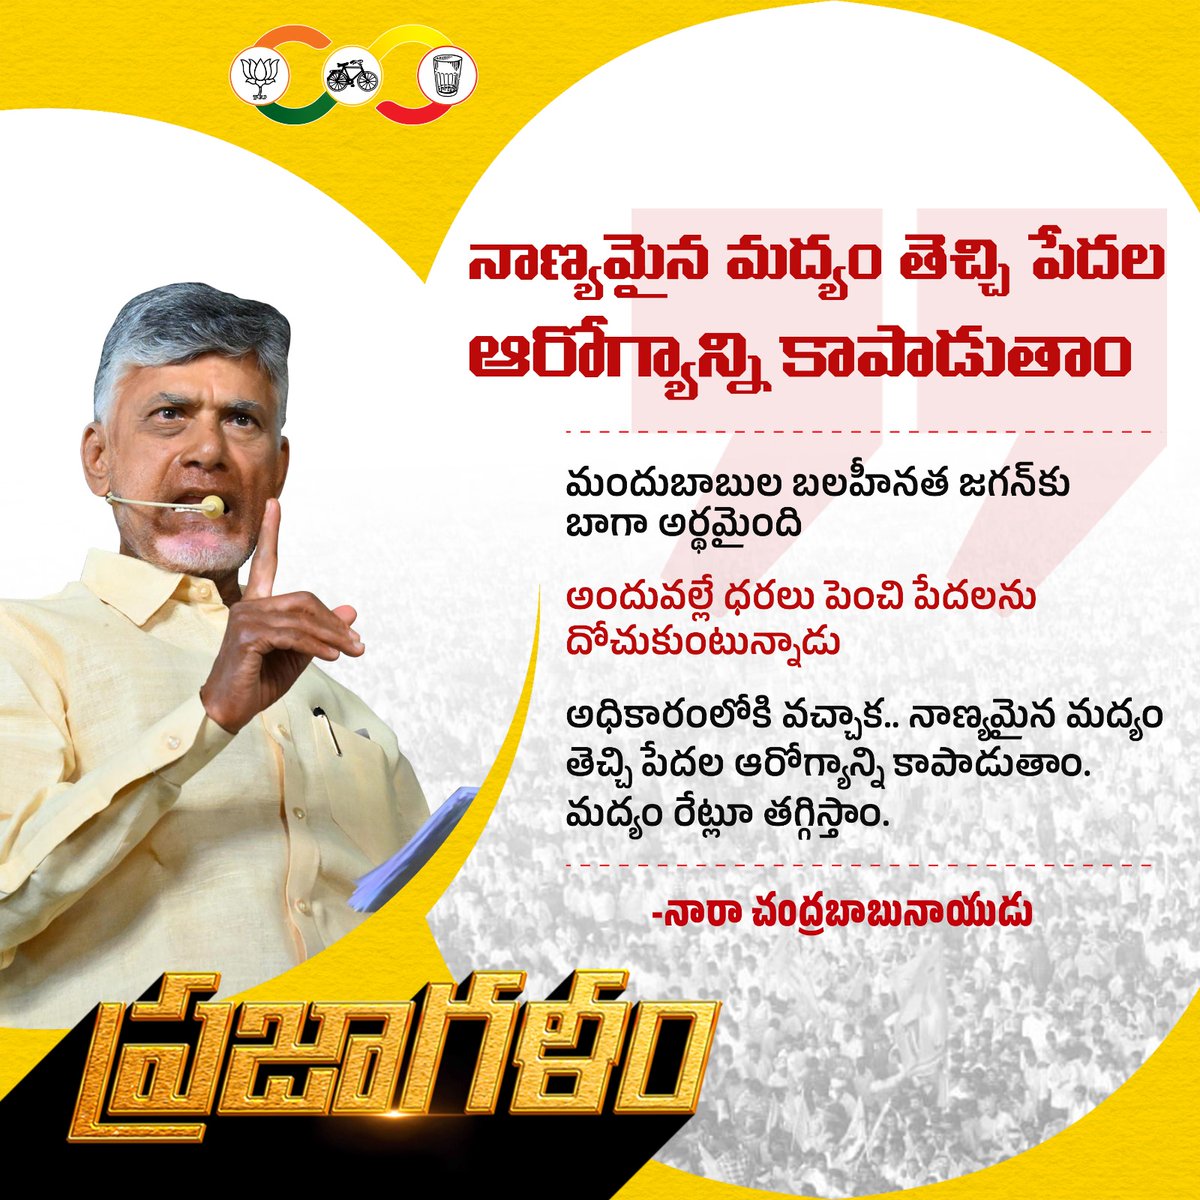 The assurance of reconstruction of AP which was destroyed during Jaganmohan Reddy's
regime is public opinion. #BabuForJanaRajyam